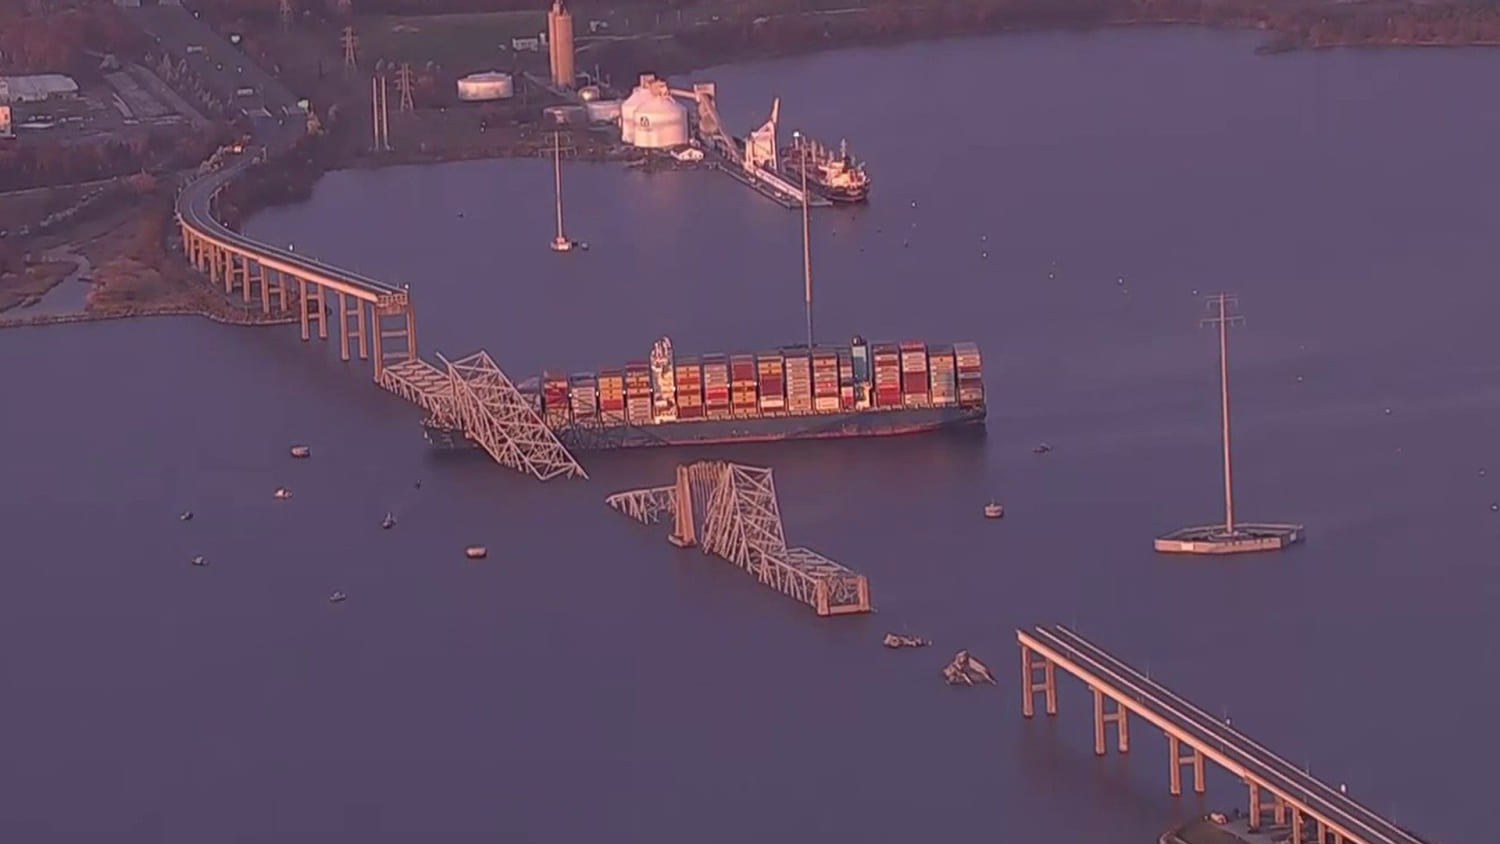 Rescue operation underway after Baltimore's Key Bridge collapses